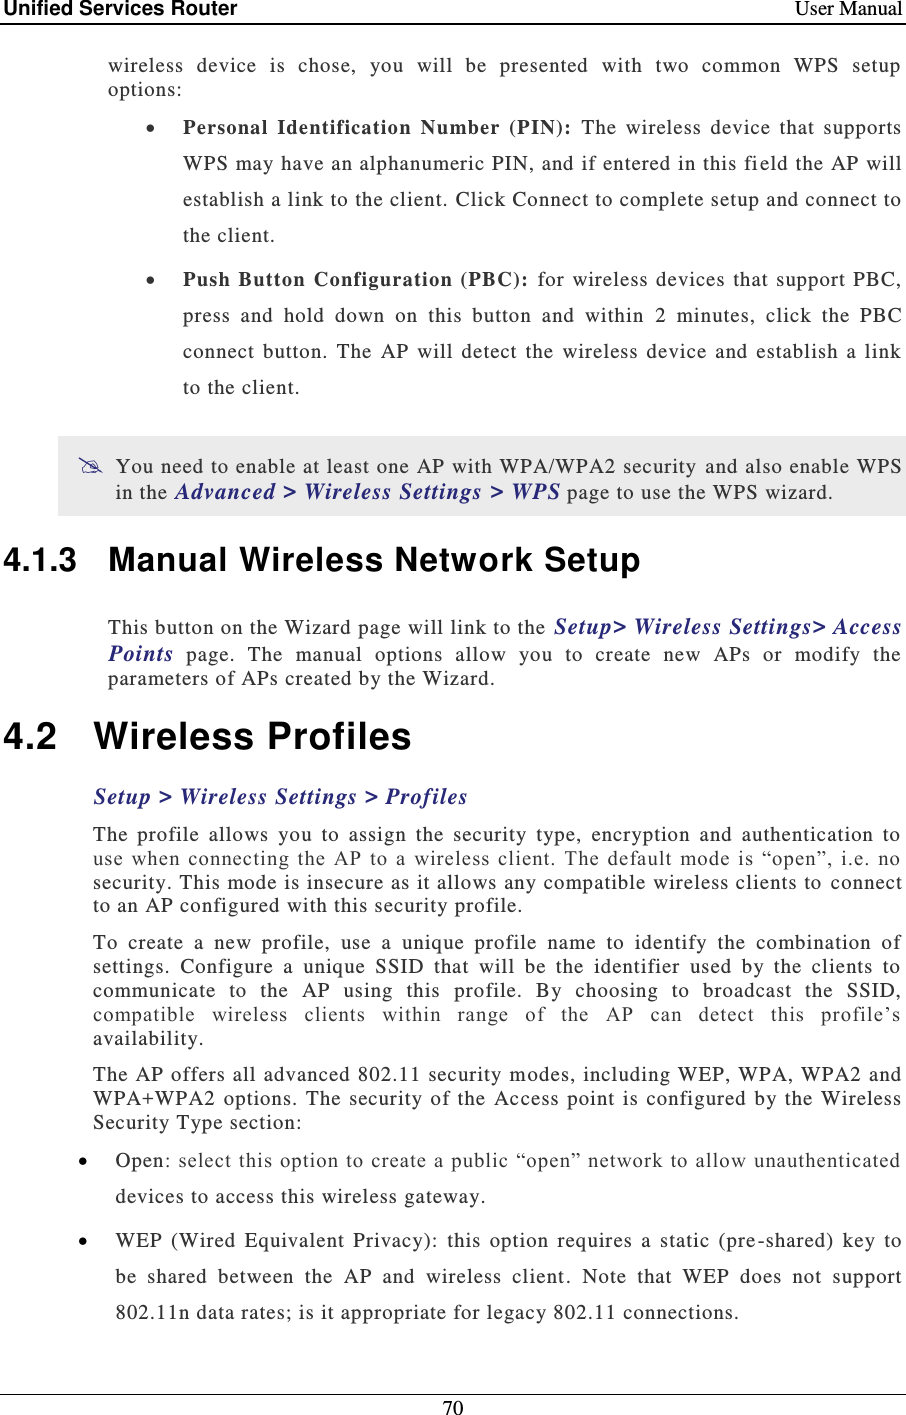 Unified Services Router    User Manual 70  wireless  device  is  chose,  you  will  be  presented  with  two  common  WPS  setup options:  Personal  Identification  Number  (PIN):   The  wireless  device  that  supports WPS may have an alphanumeric PIN, and if entered in this fi eld the AP will establish a link to the client. Click Connect to complete setup and connect to the client.   Push  Button  Configuration (PBC):  for wireless  devices  that  support PBC, press  and  hold  down  on  this  button  and  within  2  minutes,  click  the  PBC connect  button.  The  AP  will  detect  the  wireless  device  and  establish  a  link to the client.   You need to enable at least one AP with WPA/WPA2 security  and also enable WPS in the Advanced &gt; Wireless Settings &gt; WPS page to use the WPS wizard. 4.1.3  Manual Wireless Network Setup This button on the Wizard page will link to the  Setup&gt; Wireless Settings&gt; Access Points  page.  The  manual  options  allow  you  to  create  new  APs  or  modify  the parameters of APs created by the Wizard.  4.2  Wireless Profiles Setup &gt; Wireless Settings &gt; Profiles  The  profile  allows  you  to  assign  the  security  type,  encryption  and  authentication  to use  when  connecting  the  AP  to a  wireless client.  The  default  mode  is  “open”,  i.e.  no security. This mode is insecure as it allows any compatible wireless clients to  connect to an AP configured with this security profile.   To  create  a  new  profile,  use  a  unique  profile  name  to  identify  the  combination  of settings.  Configure  a  unique  SSID  that  will  be  the  identifier  used  by  the  clients  to communicate  to  the  AP  using  this  profile.  By  choosing  to  broadcast  the  SSID, compatible  wireless  clients  within  range  of  the  AP  can  detect  this  profile’s availability.  The AP offers  all advanced 802.11 security modes, including WEP, WPA, WPA2 and WPA+WPA2  options.  The  security  of  the  Access  point  is  configured  by  the Wireless Security Type section:  Open: select this option to create a public “open” network to allow  unauthenticated devices to access this wireless gateway.  WEP  (Wired  Equivalent  Privacy):  this  option  requires  a  static  (pre -shared)  key  to be  shared  between  the  AP  and  wireless  client.  Note  that  WEP  does  not  support 802.11n data rates; is it appropriate for legacy 802.11 connections.   